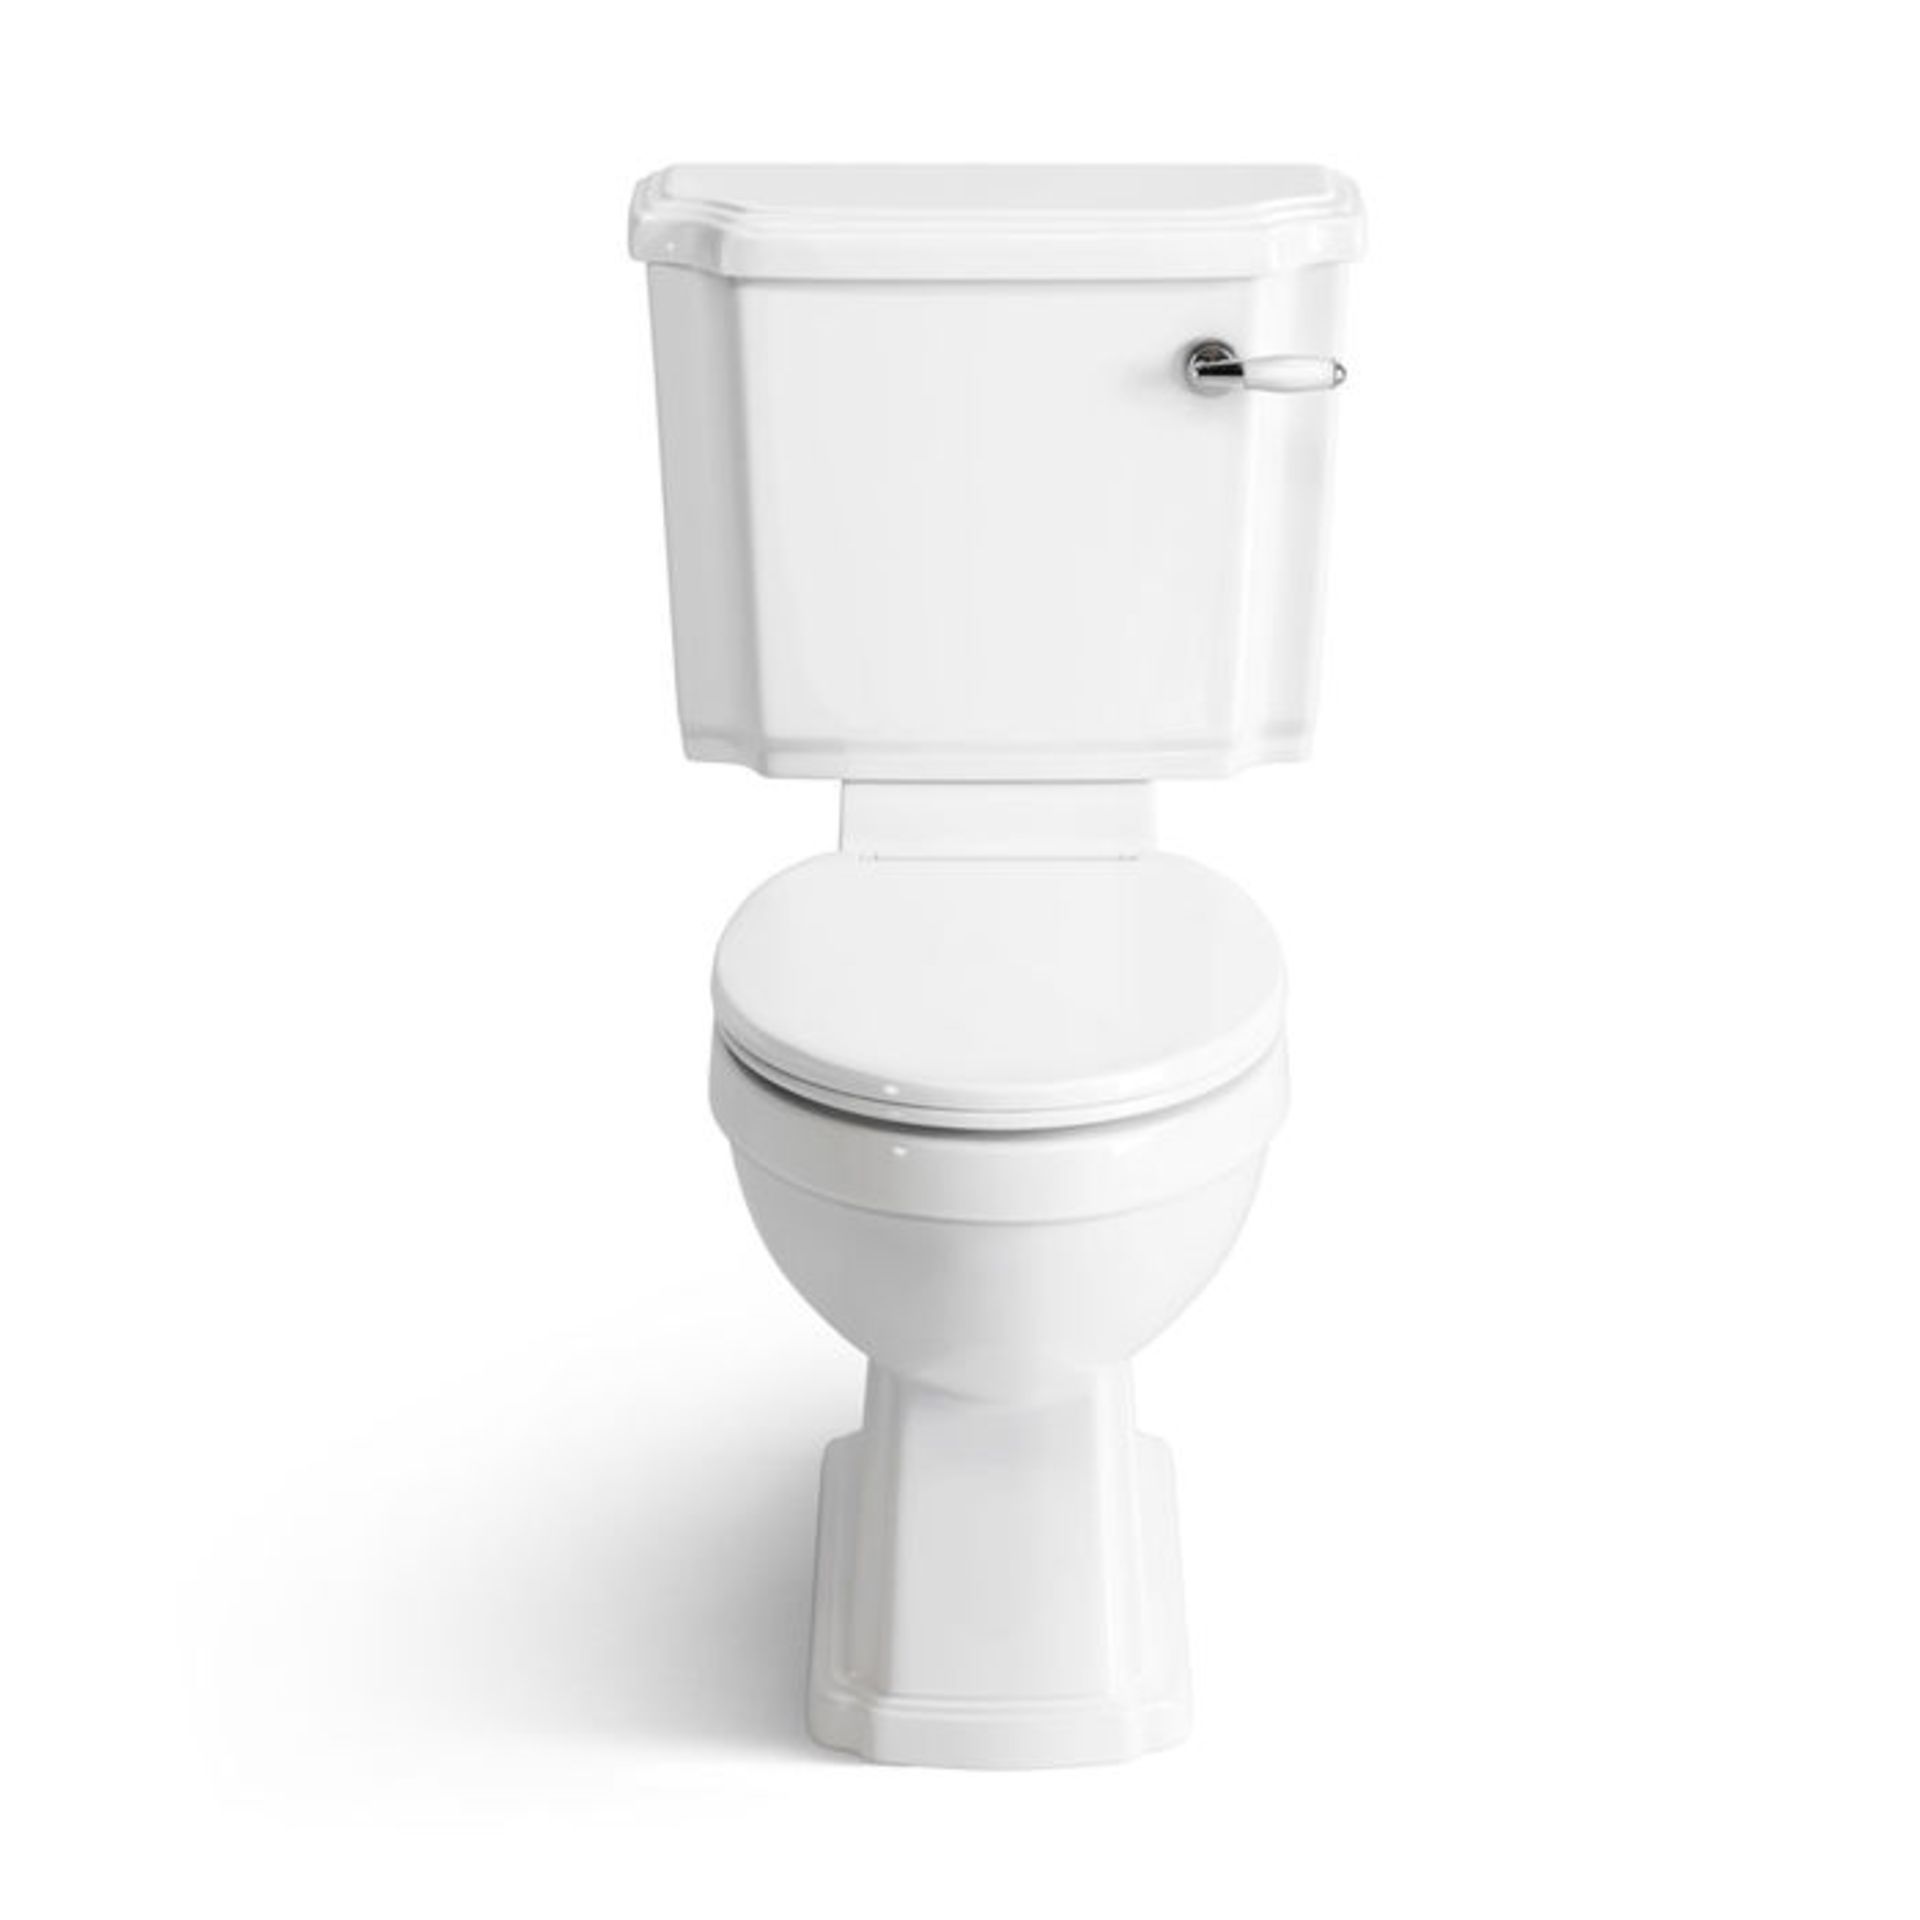 NEW & BOXED Cambridge Traditional Close Coupled Toilet & Cistern - White Seat. CCG629PAN.Tradi... - Image 3 of 3